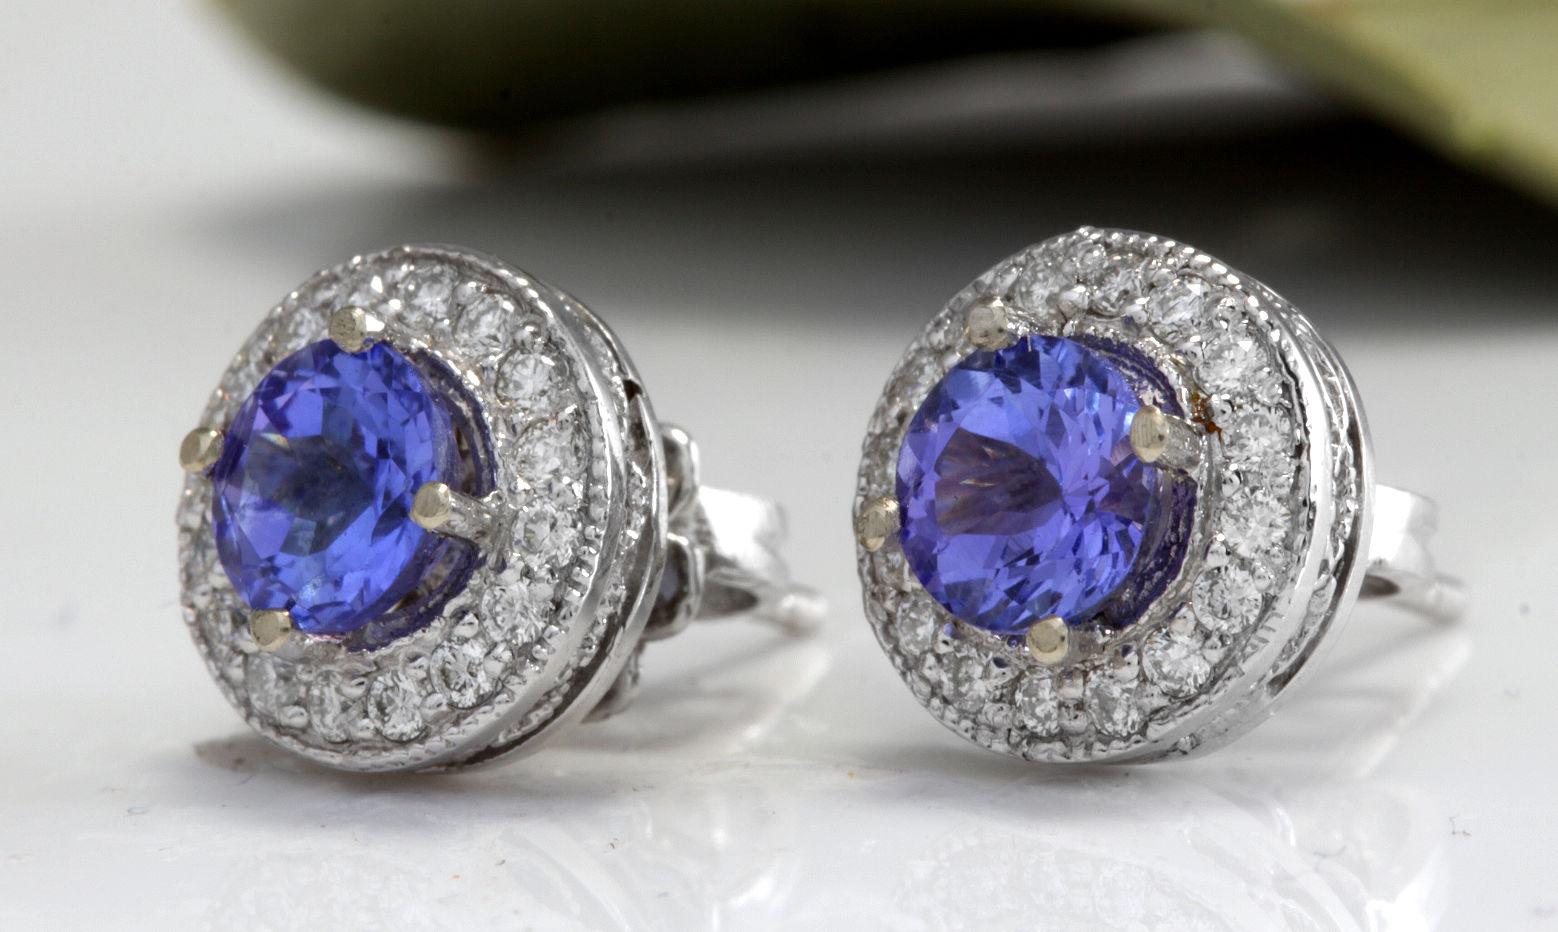 Exquisite 2.45 Carats Natural Tanzanite and Diamond 14K Solid White Gold Stud Earrings

Amazing looking piece!

Total Natural Round Cut White Diamonds Weight: Approx. 0.45Carats (color G-H / Clarity SI1-SI2)

Total Natural Round Cut Tanzanites